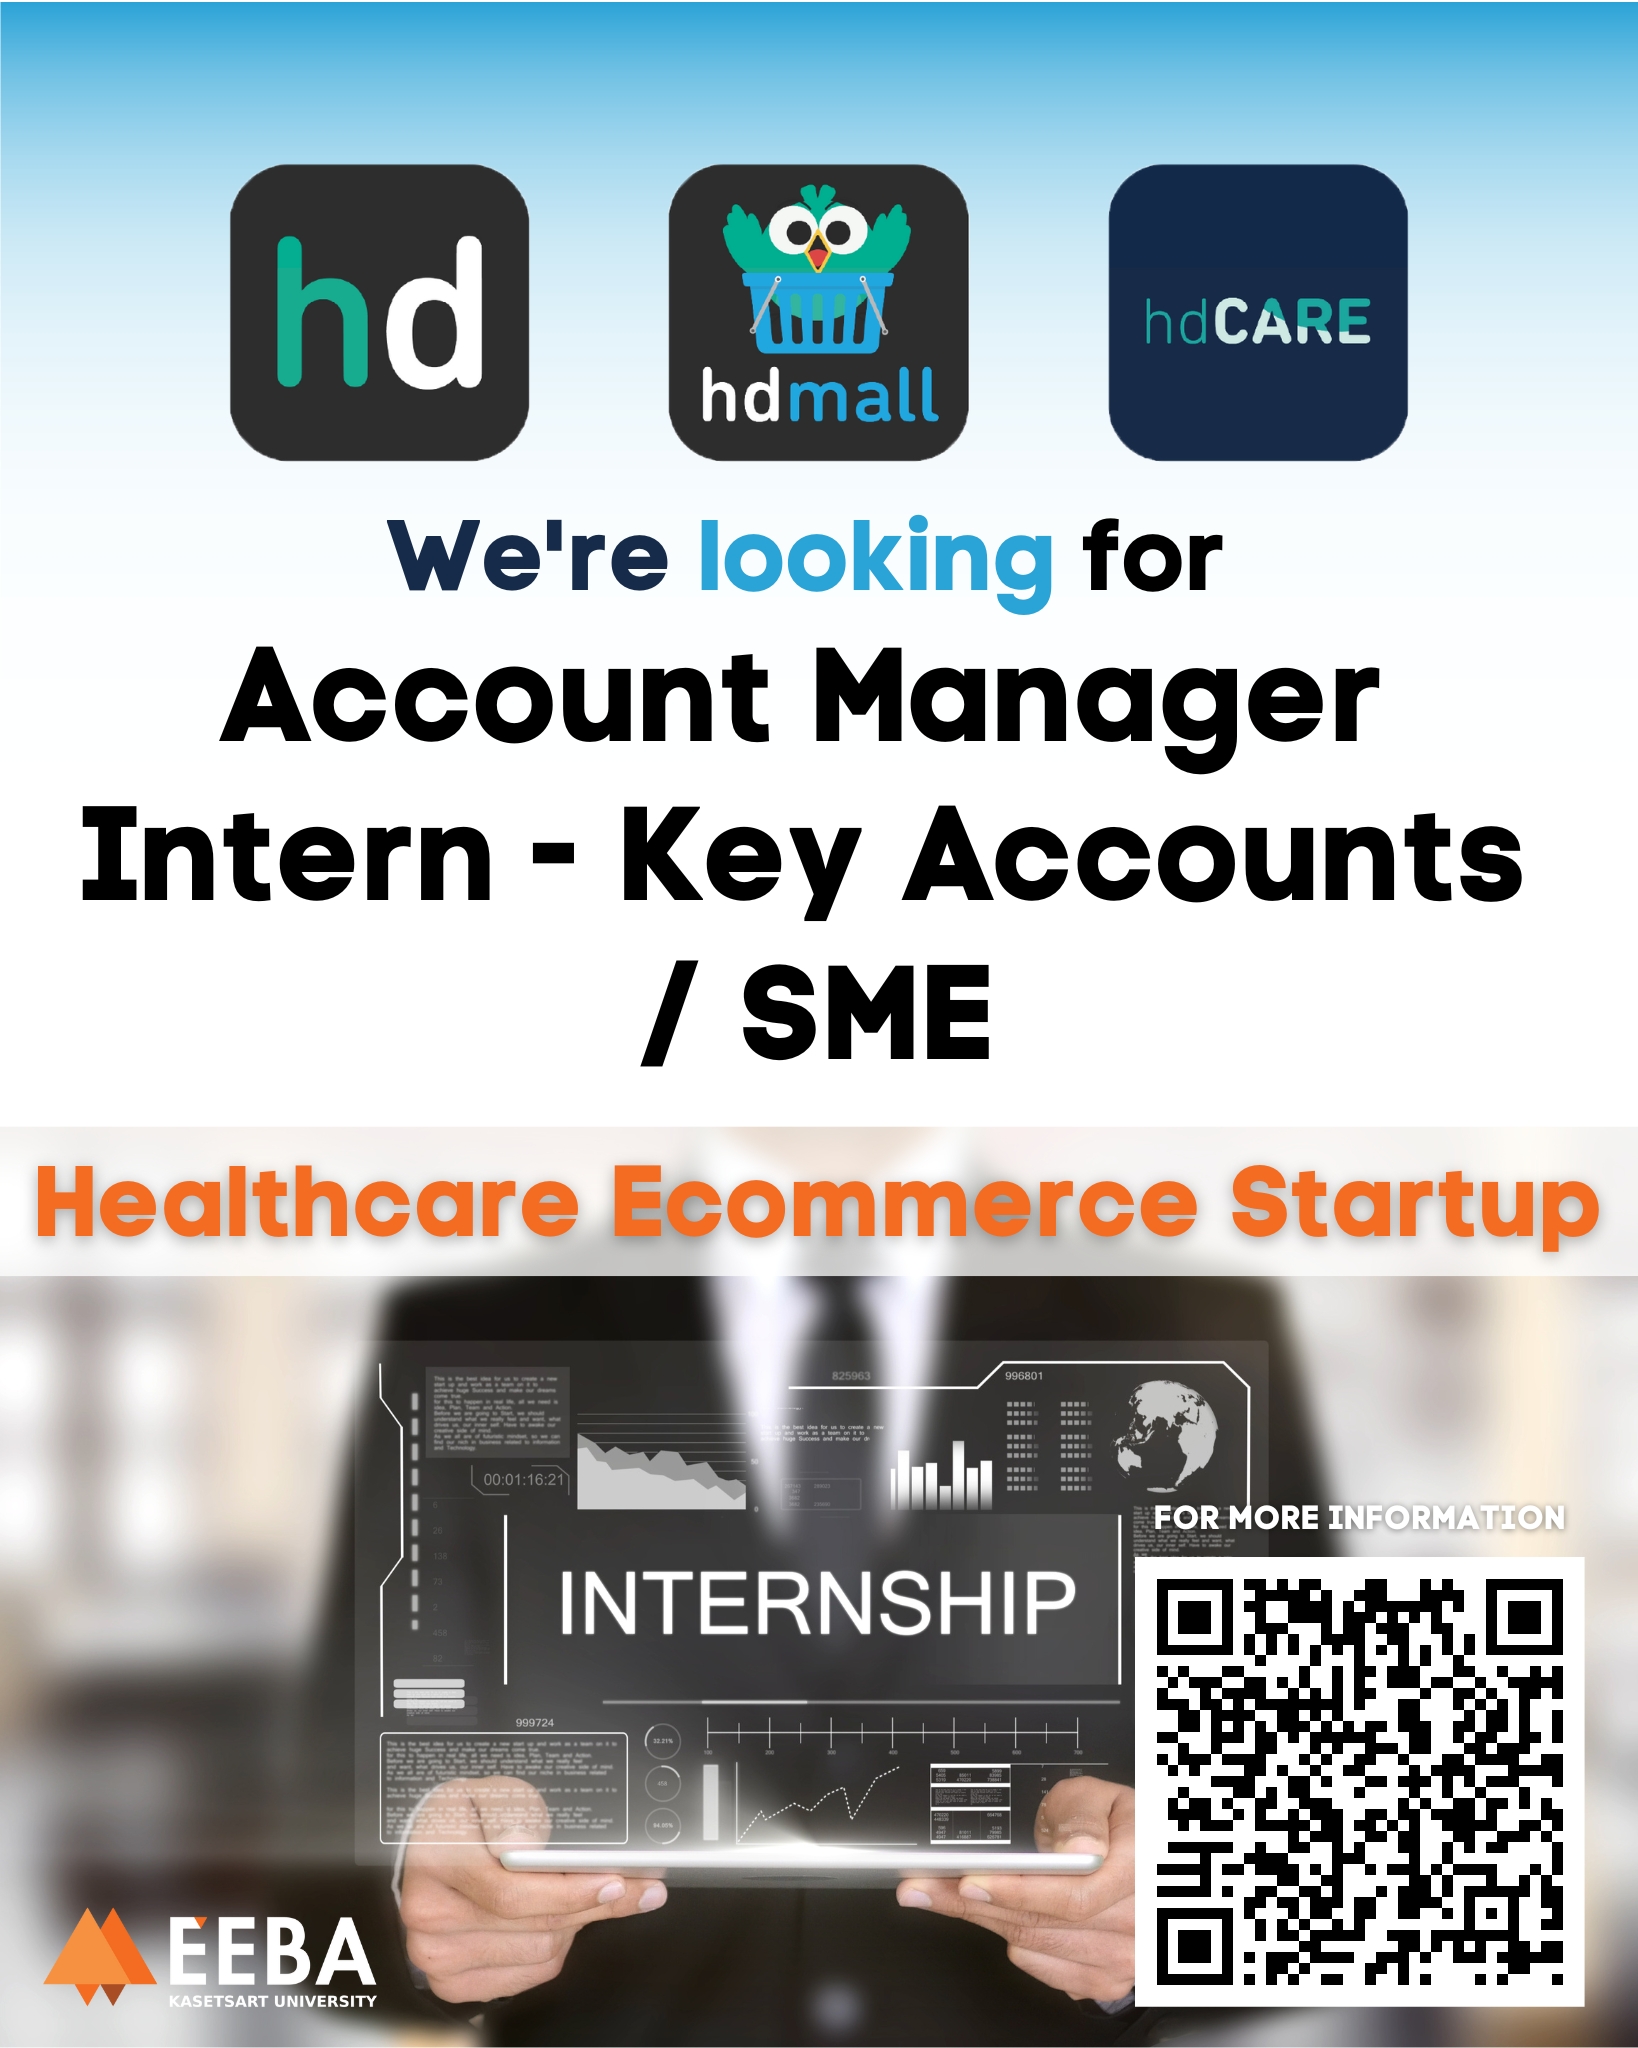 HD is looking for Account Manager Intern – Key Accounts/ SME